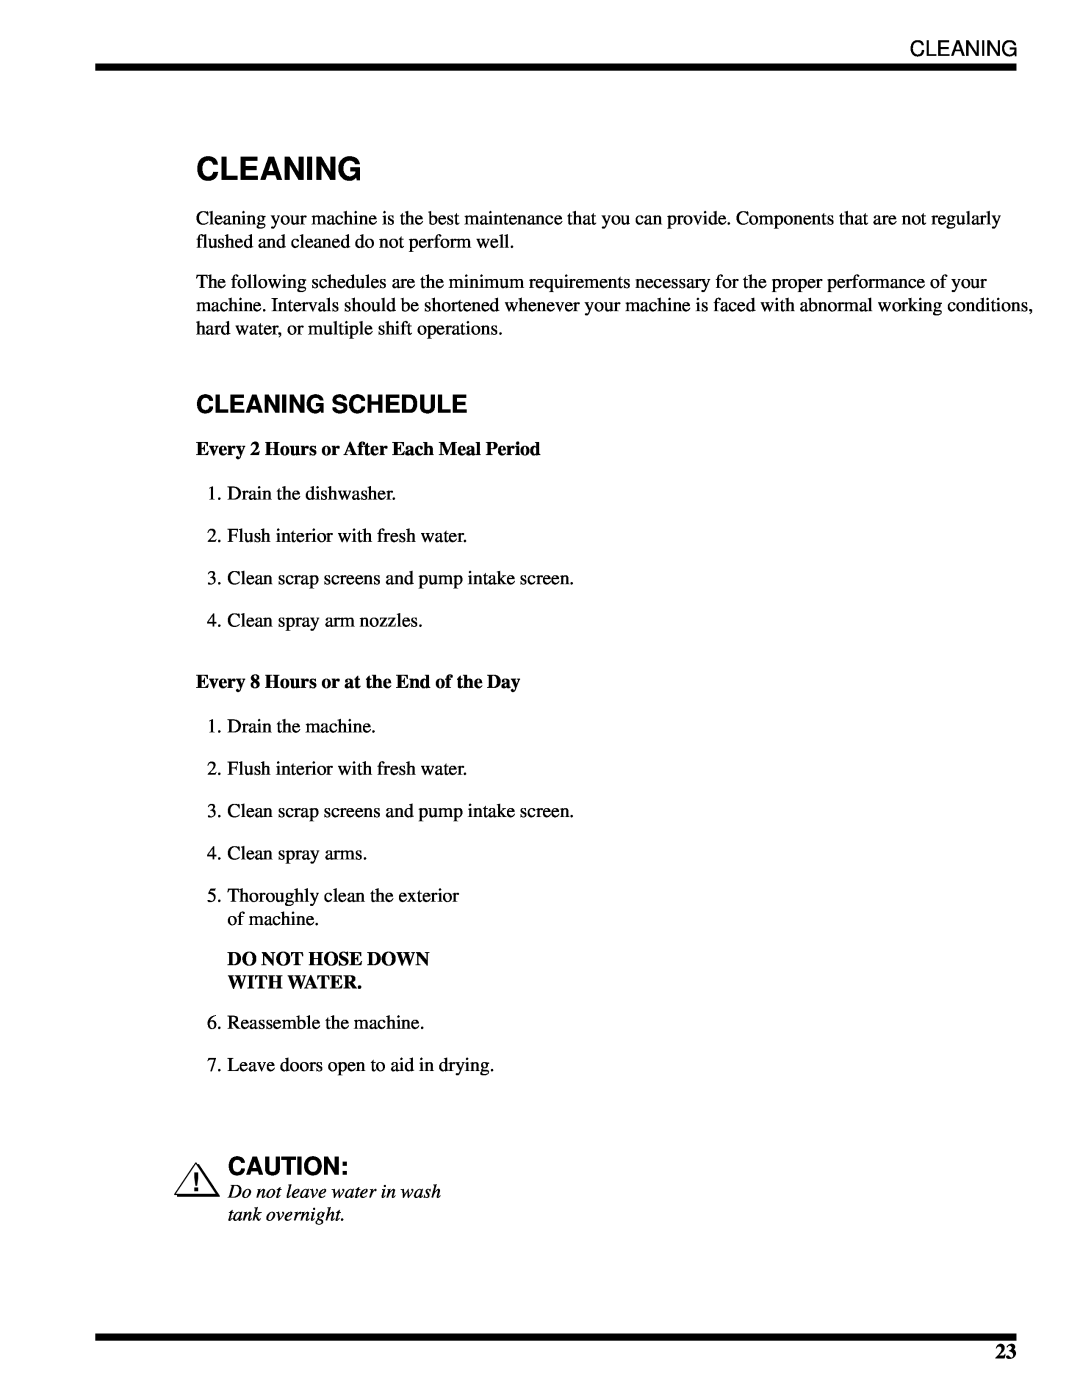 Moyer Diebel MH-6LM3, MH-6NM3 Cleaning Schedule, Every 2 Hours or After Each Meal Period, Do Not Hose Down With Water 